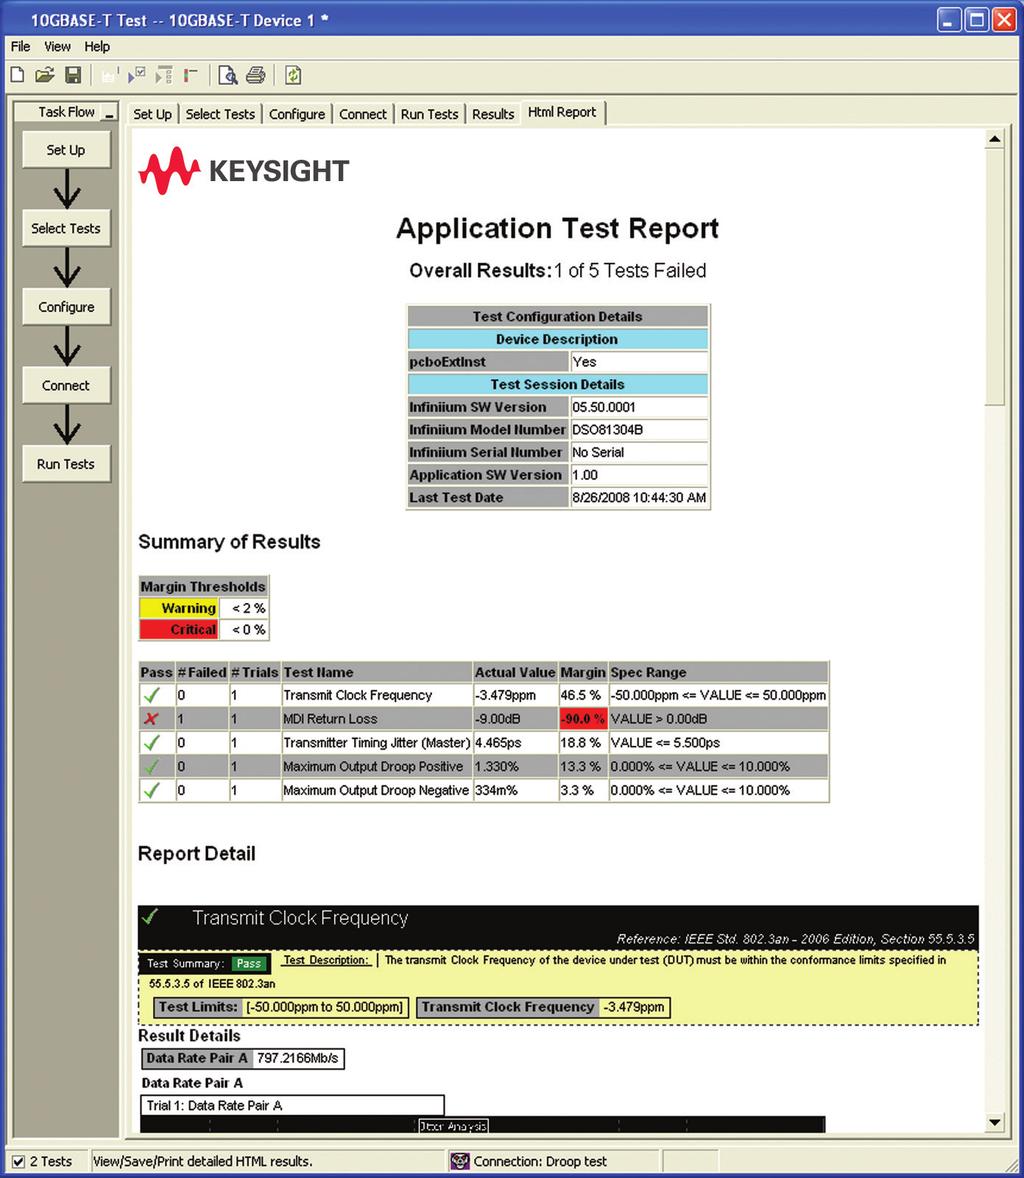 09 Keysight U7236A/B 10GBASE-T, MGBASE-T and NBASE-T Ethernet Electrical Conformance Application - Data Sheet Reports with Margin Analysis (Continued) Figure 6.